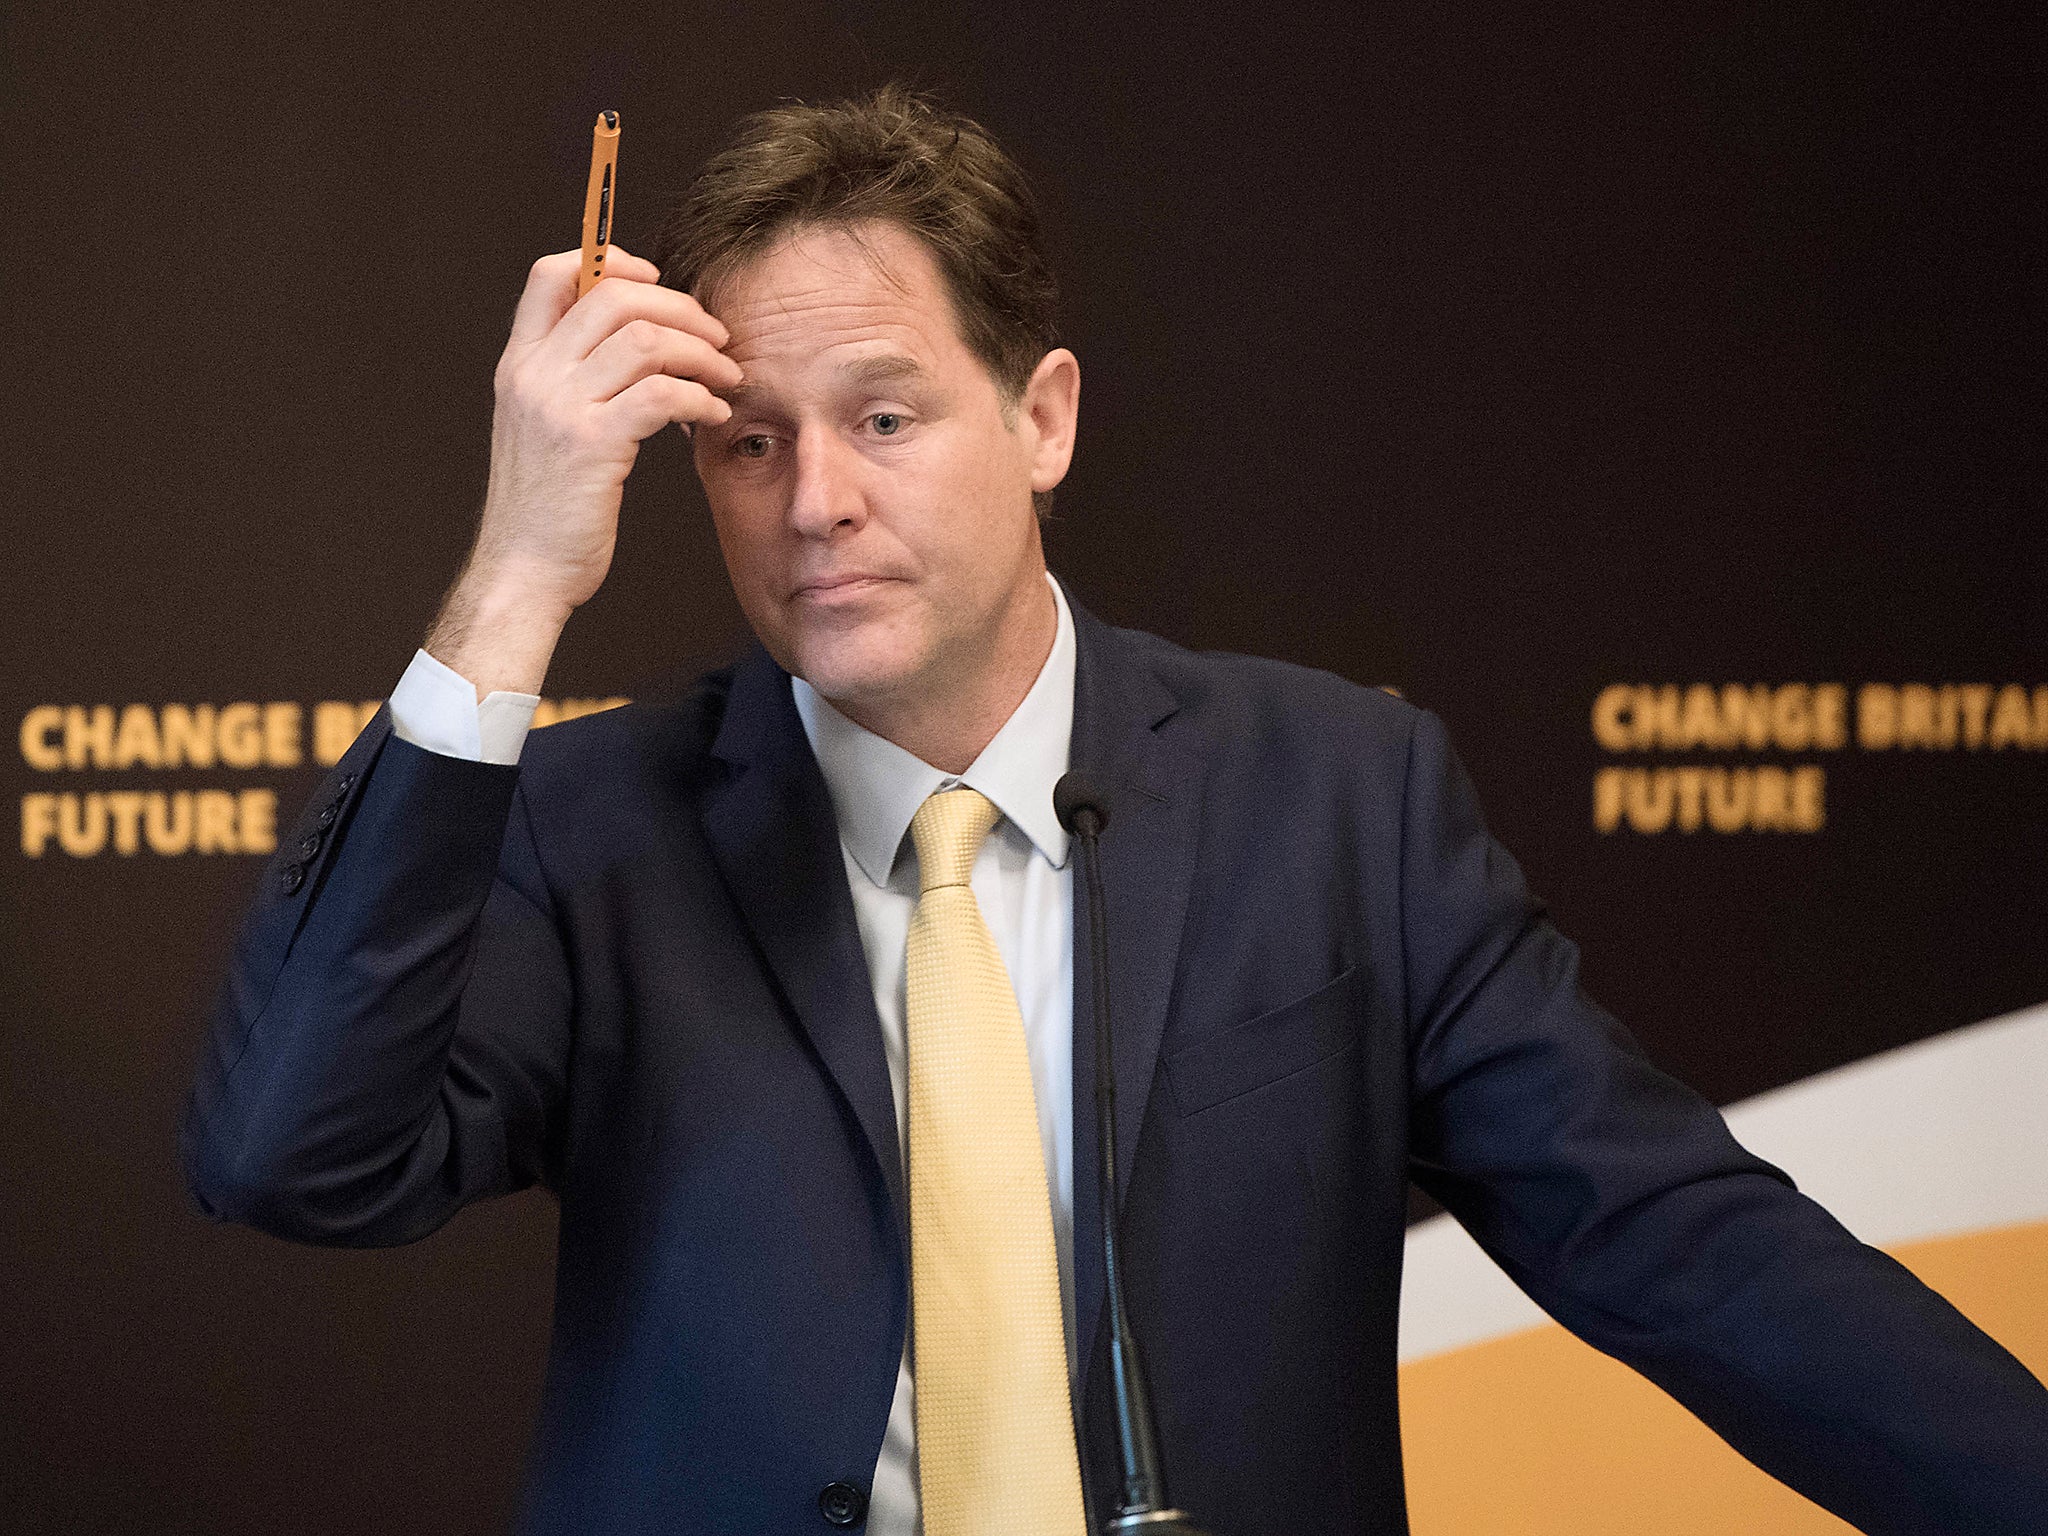 Nick Clegg lost his seat in Sheffield Hallam at the general election